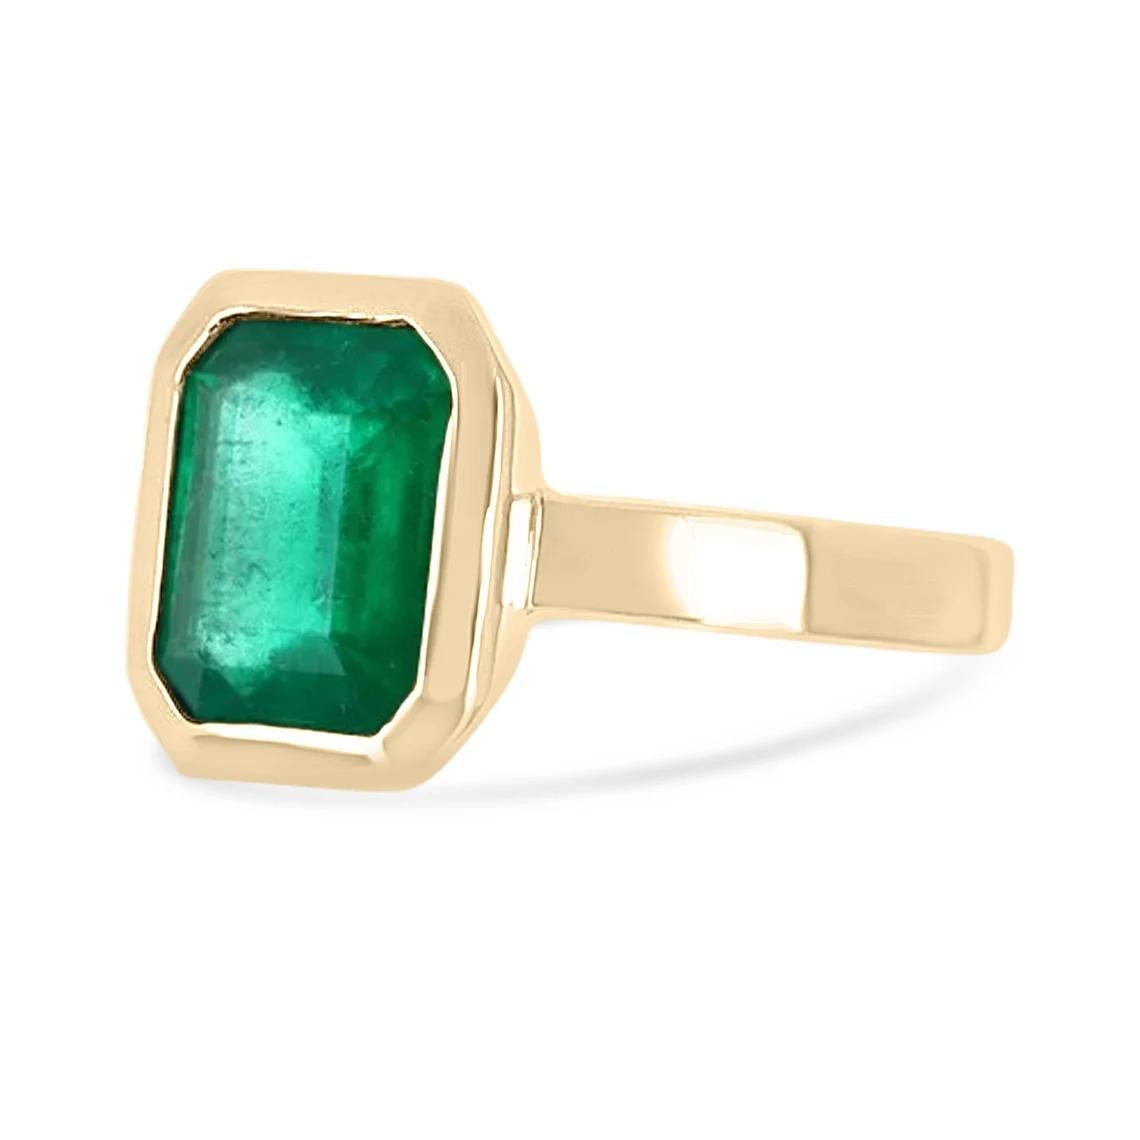 Displayed is a bespoke Colombian emerald solitaire emerald-cut engagement/right-hand ring in 14K yellow gold. This gorgeous solitaire ring carries a 1.90-carat emerald in a bezel setting. The emerald has transparent clarity with minor flaws that are